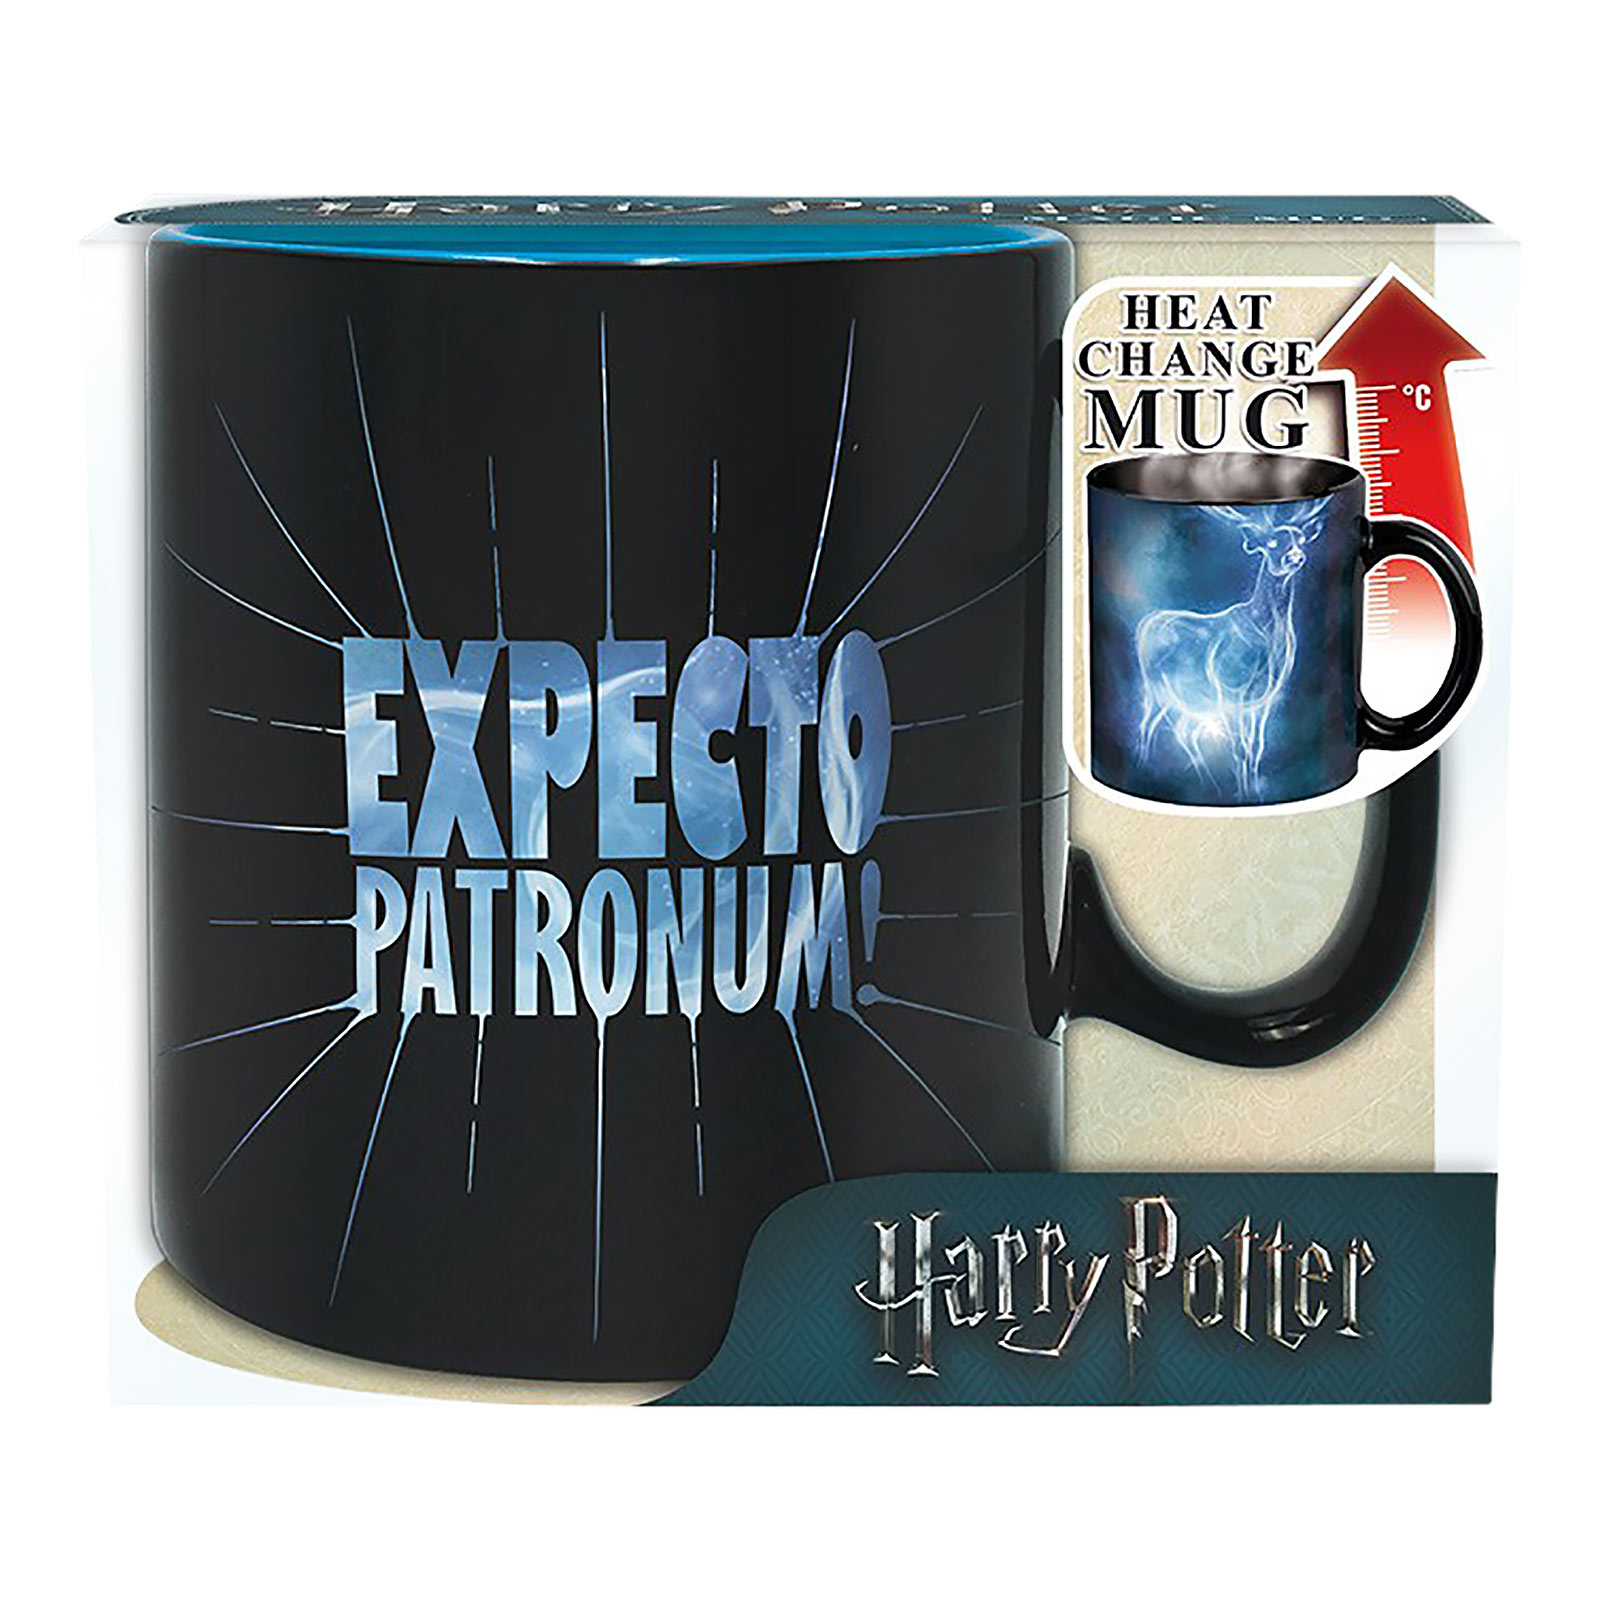 Harry Potter - Expecto Patronum Dementor Thermo Effect Mug